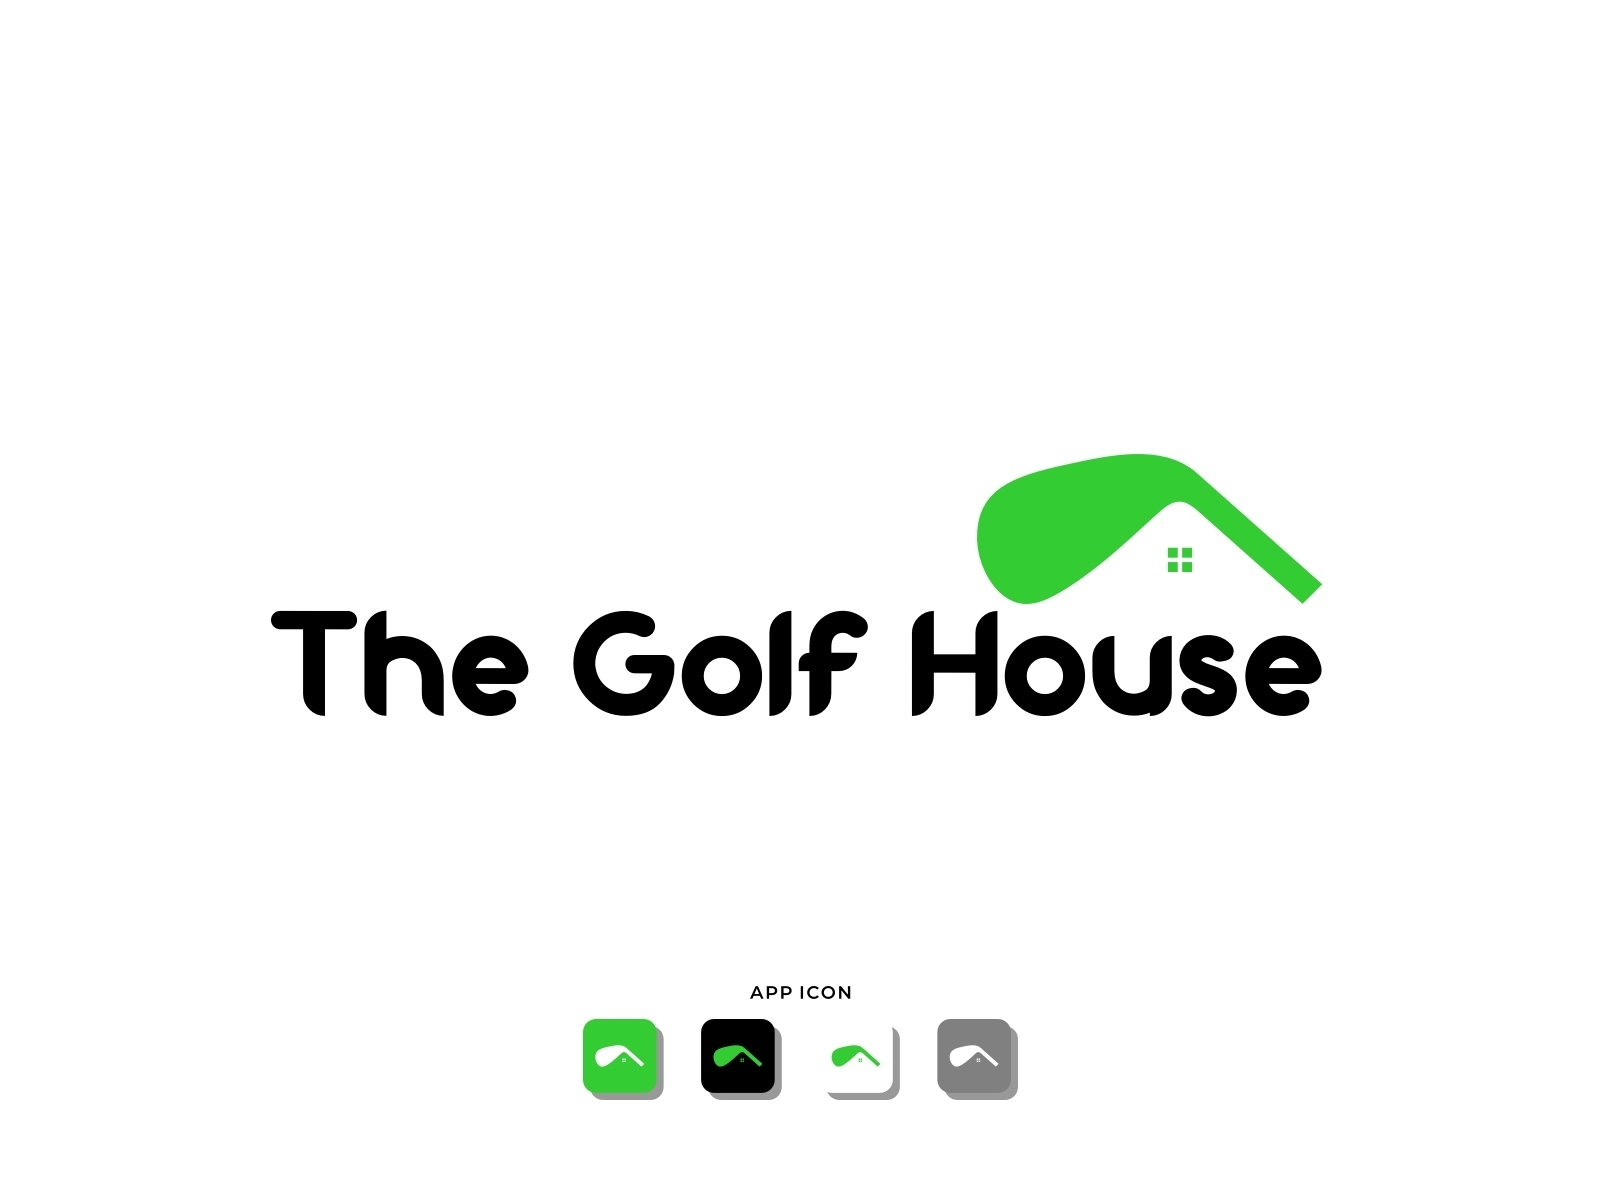 The Golf House by harjap singh on Dribbble